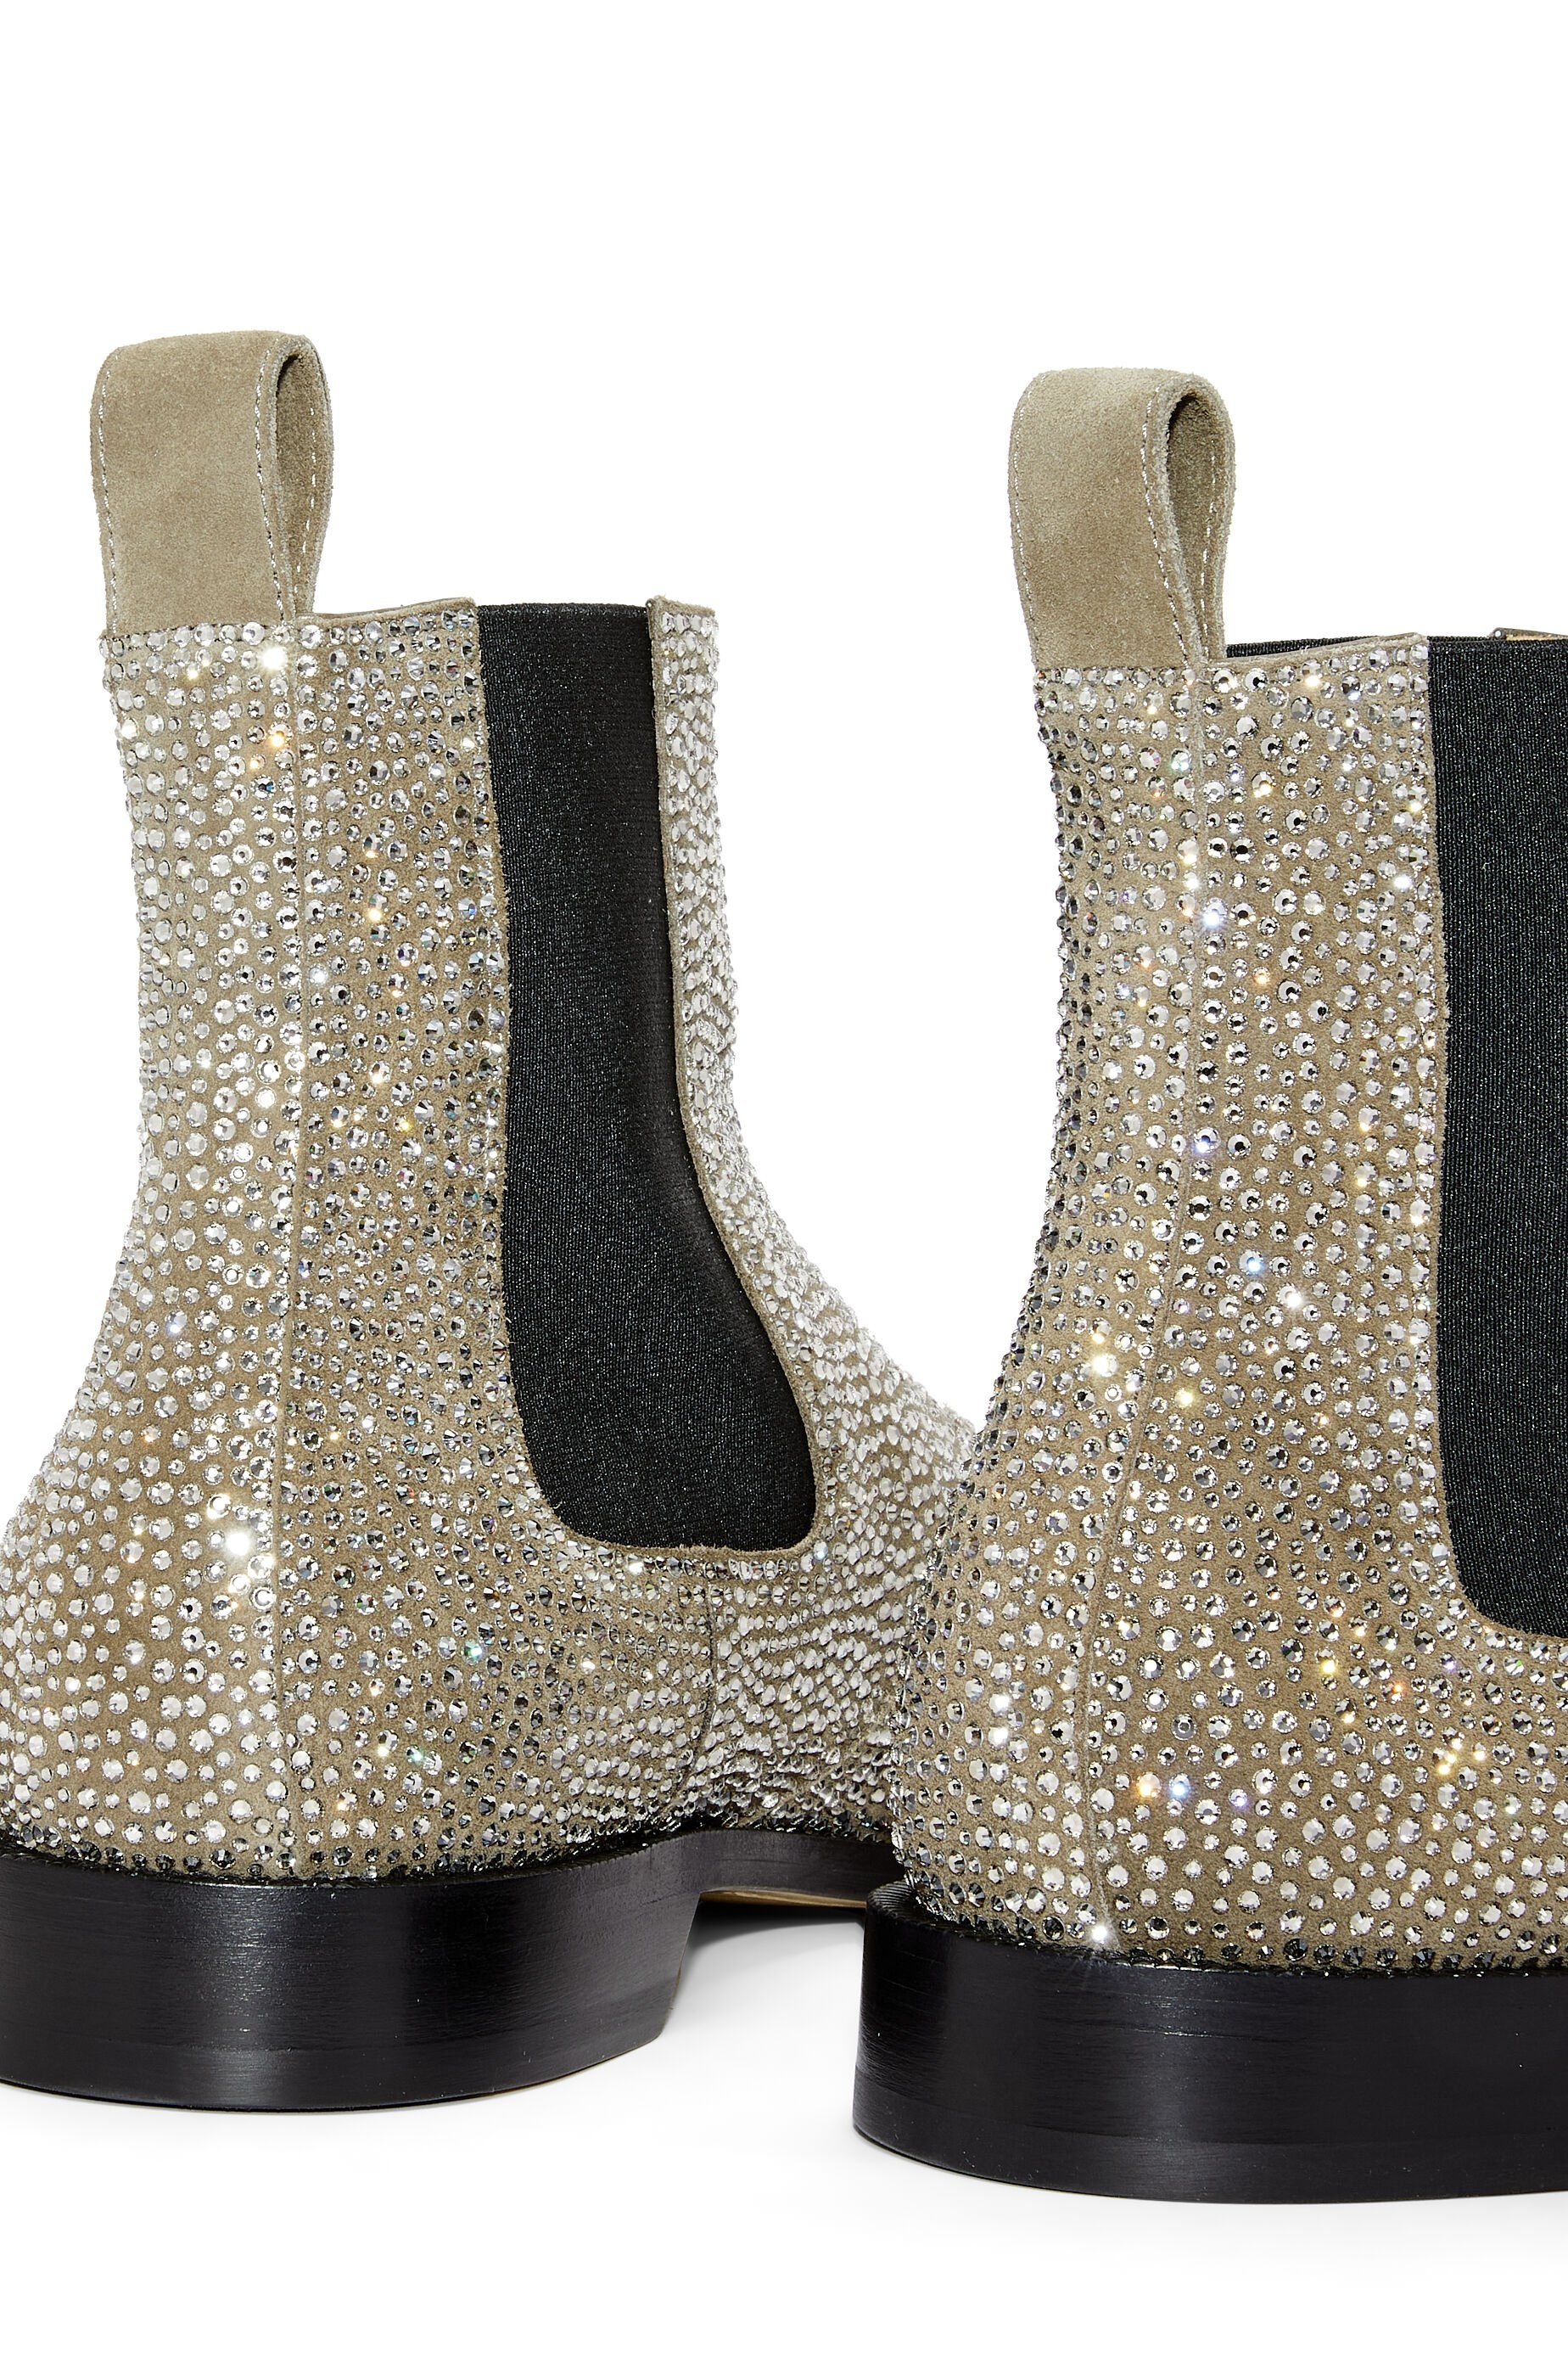 Campo Chelsea boot in suede calfskin and rhinestones - 4